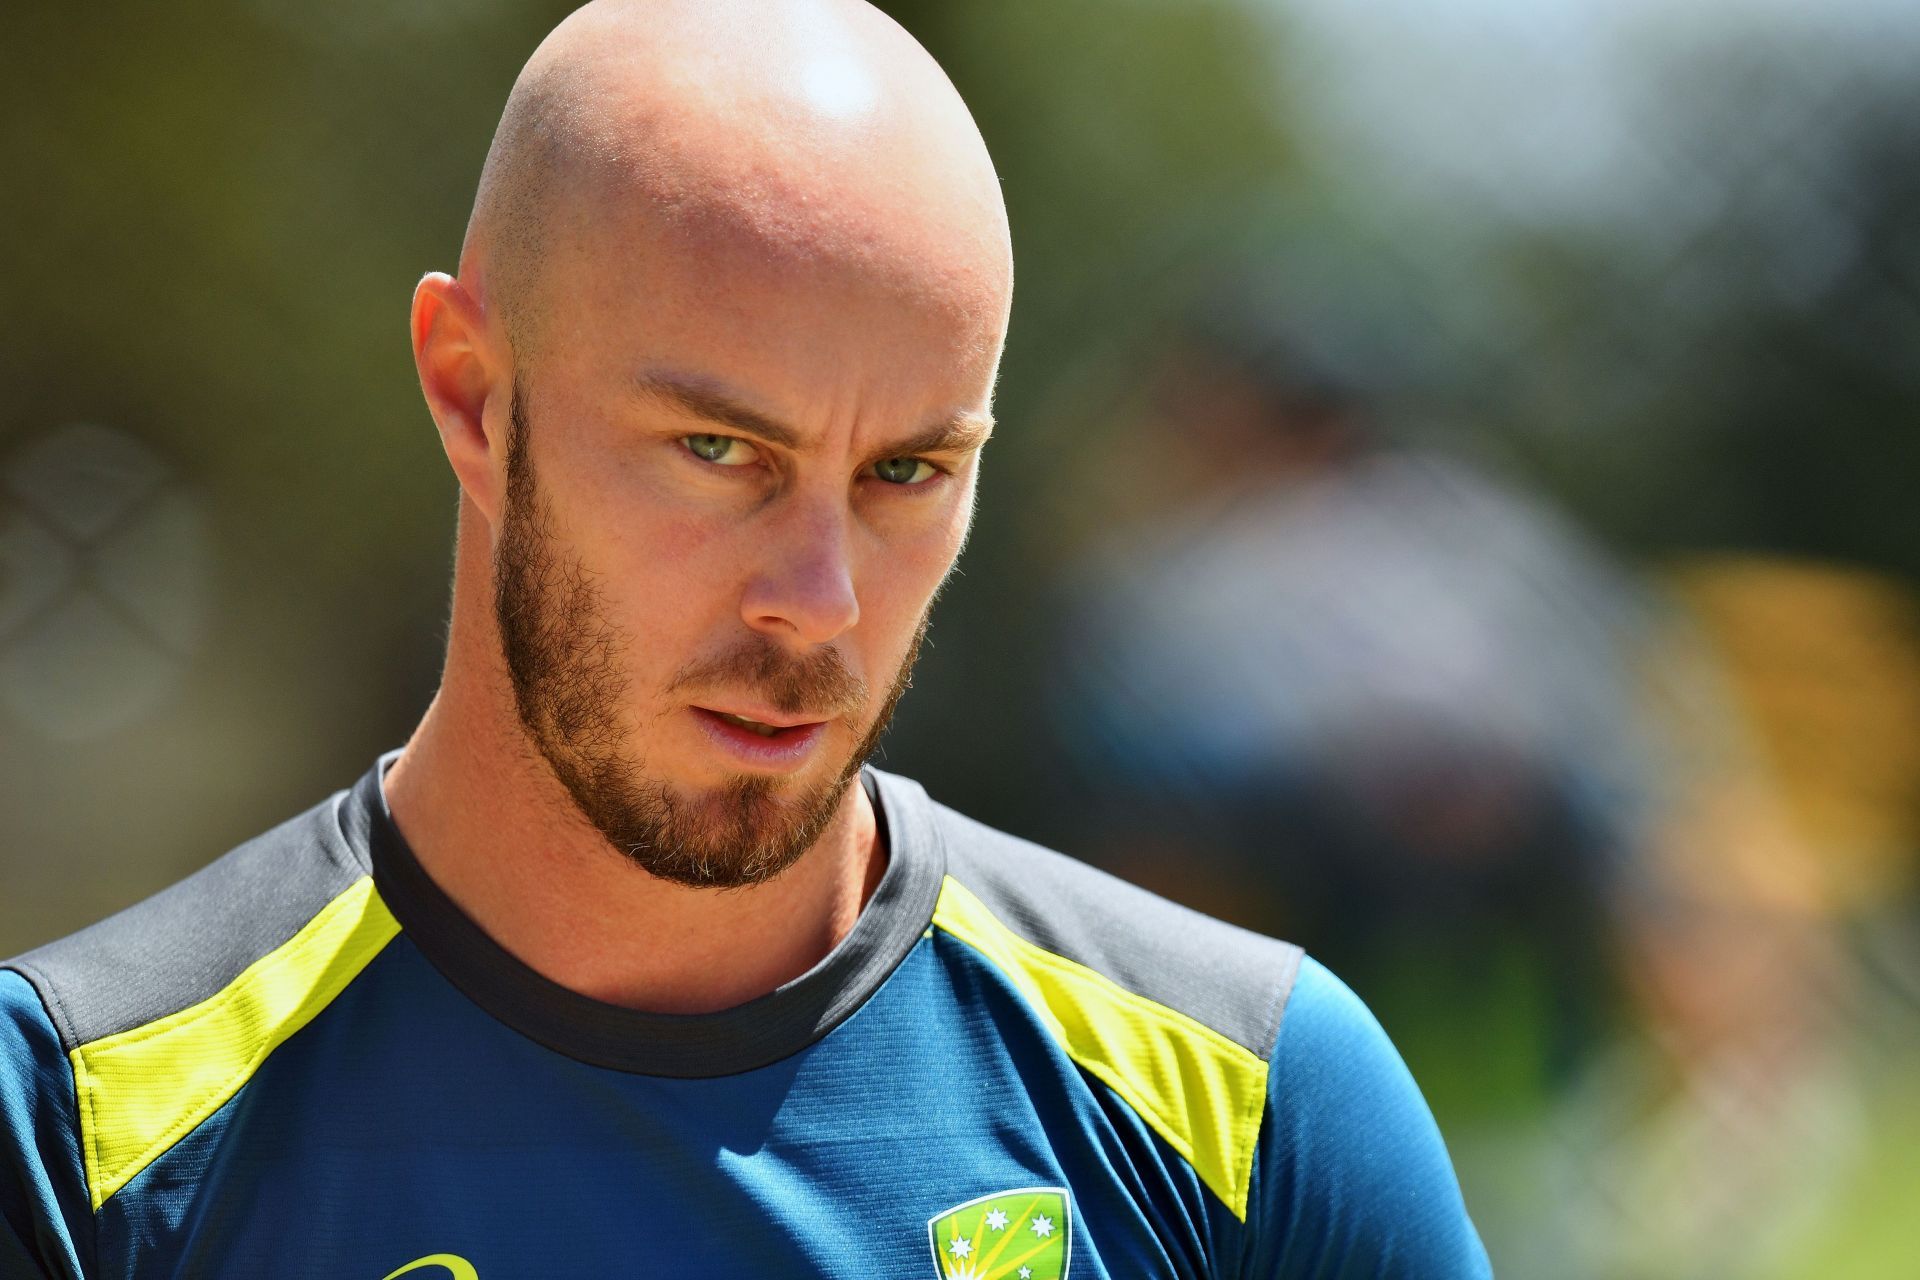 Chris Lynn was released by Mumbai Indians